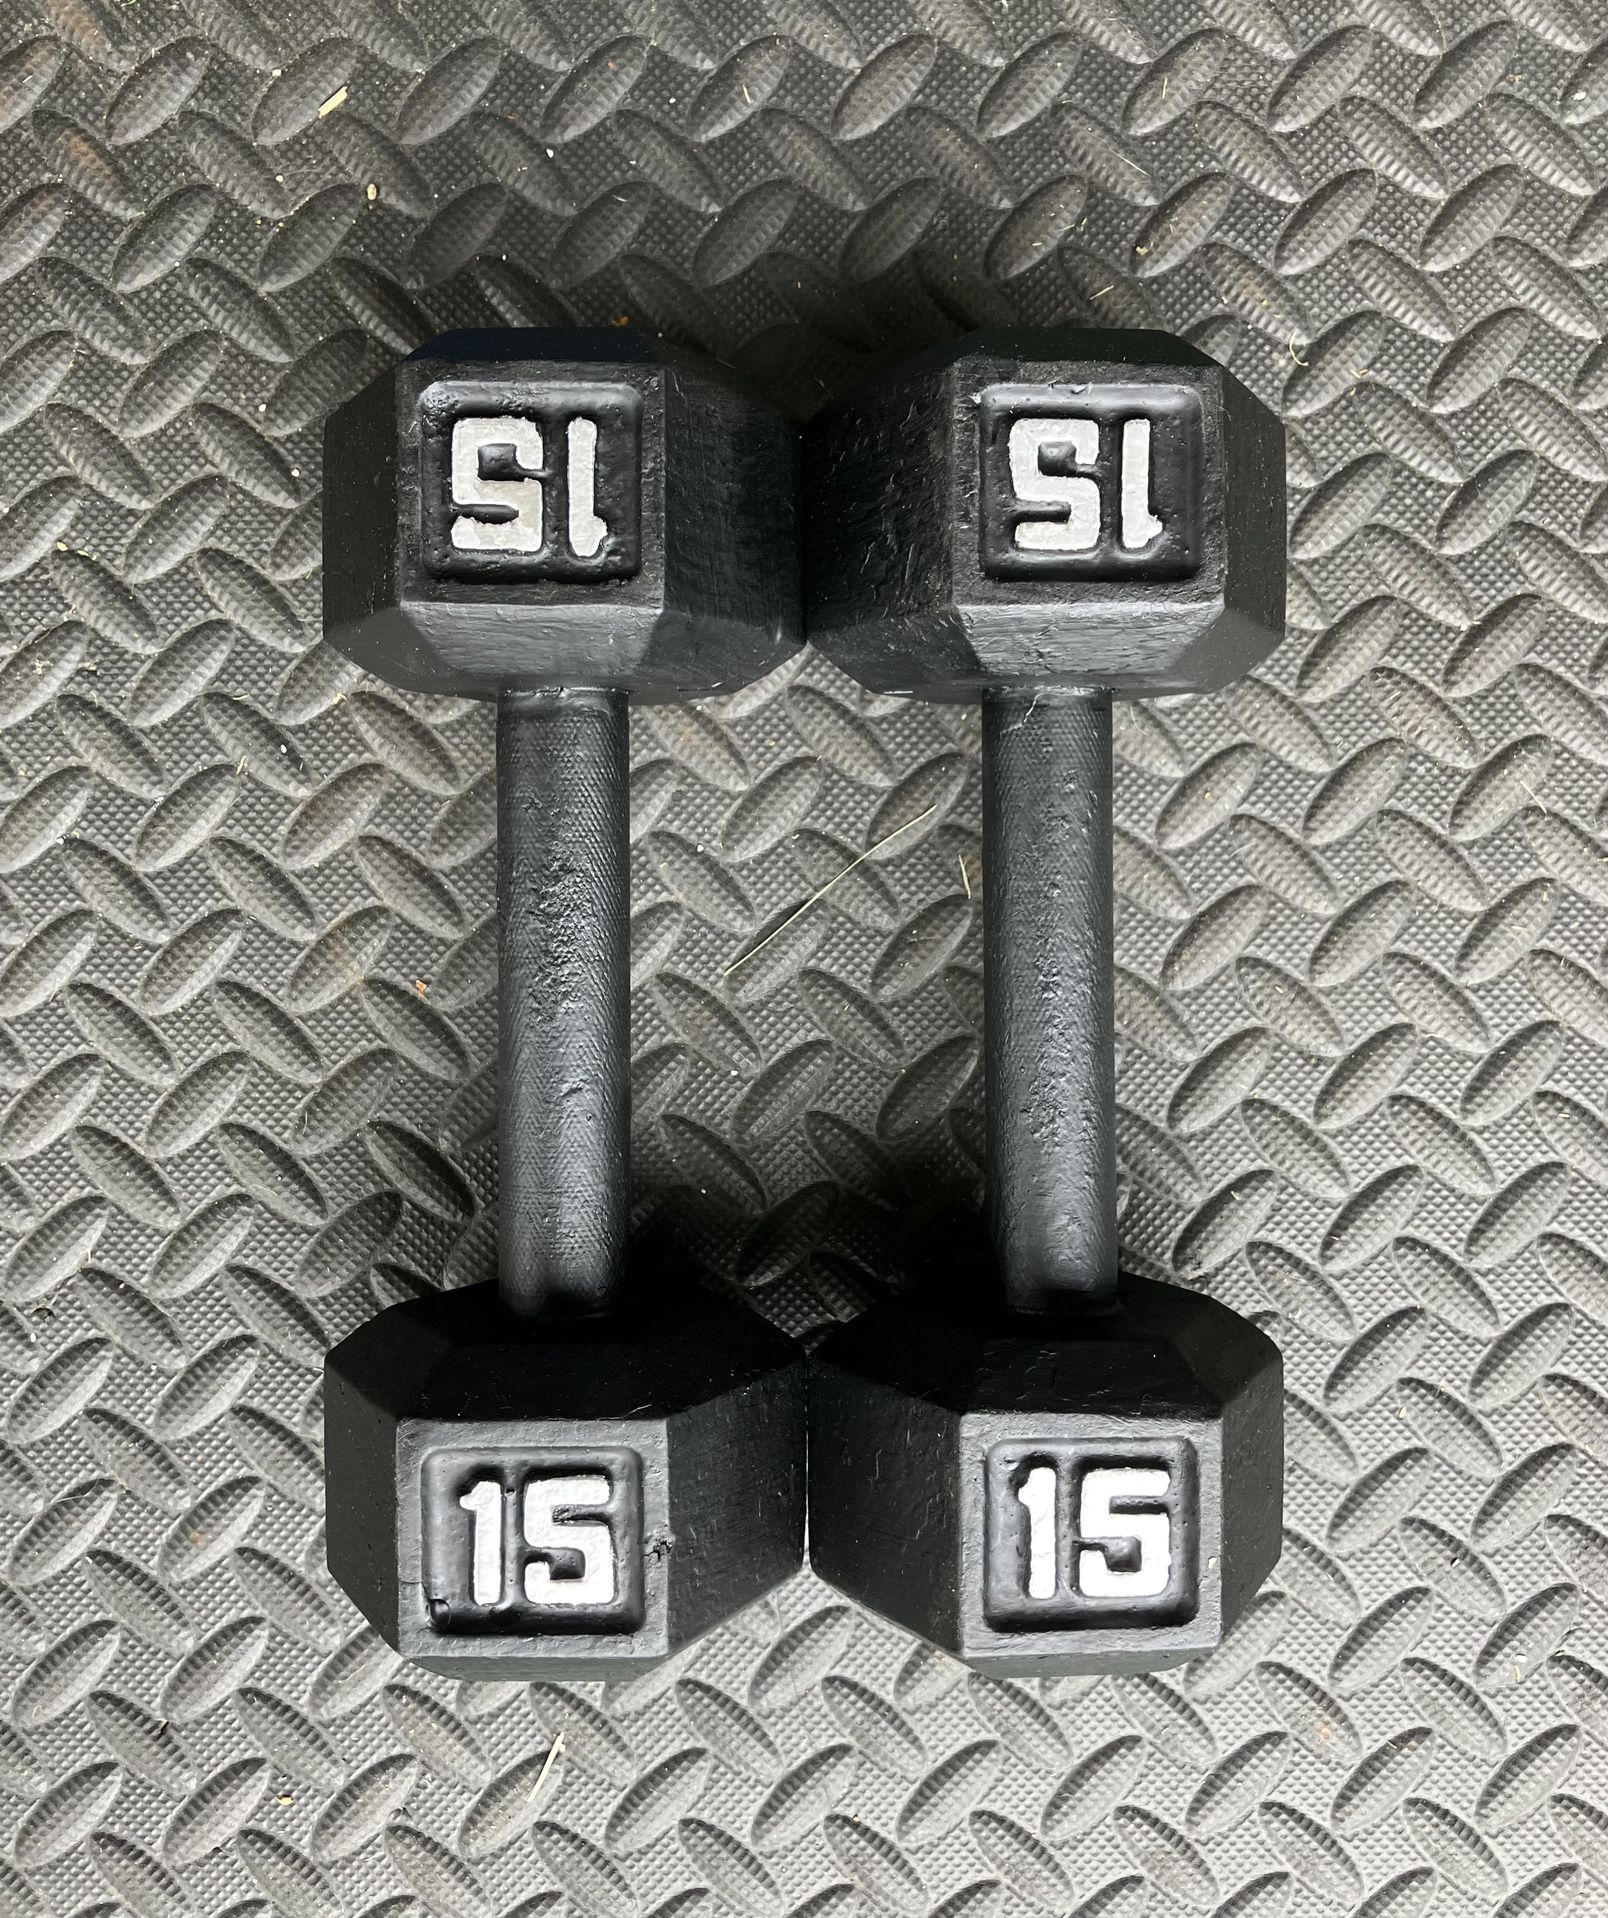 15lb dumbbell set dumbbells 15 lb lbs 15lbs weight weights Cast Iron Hex